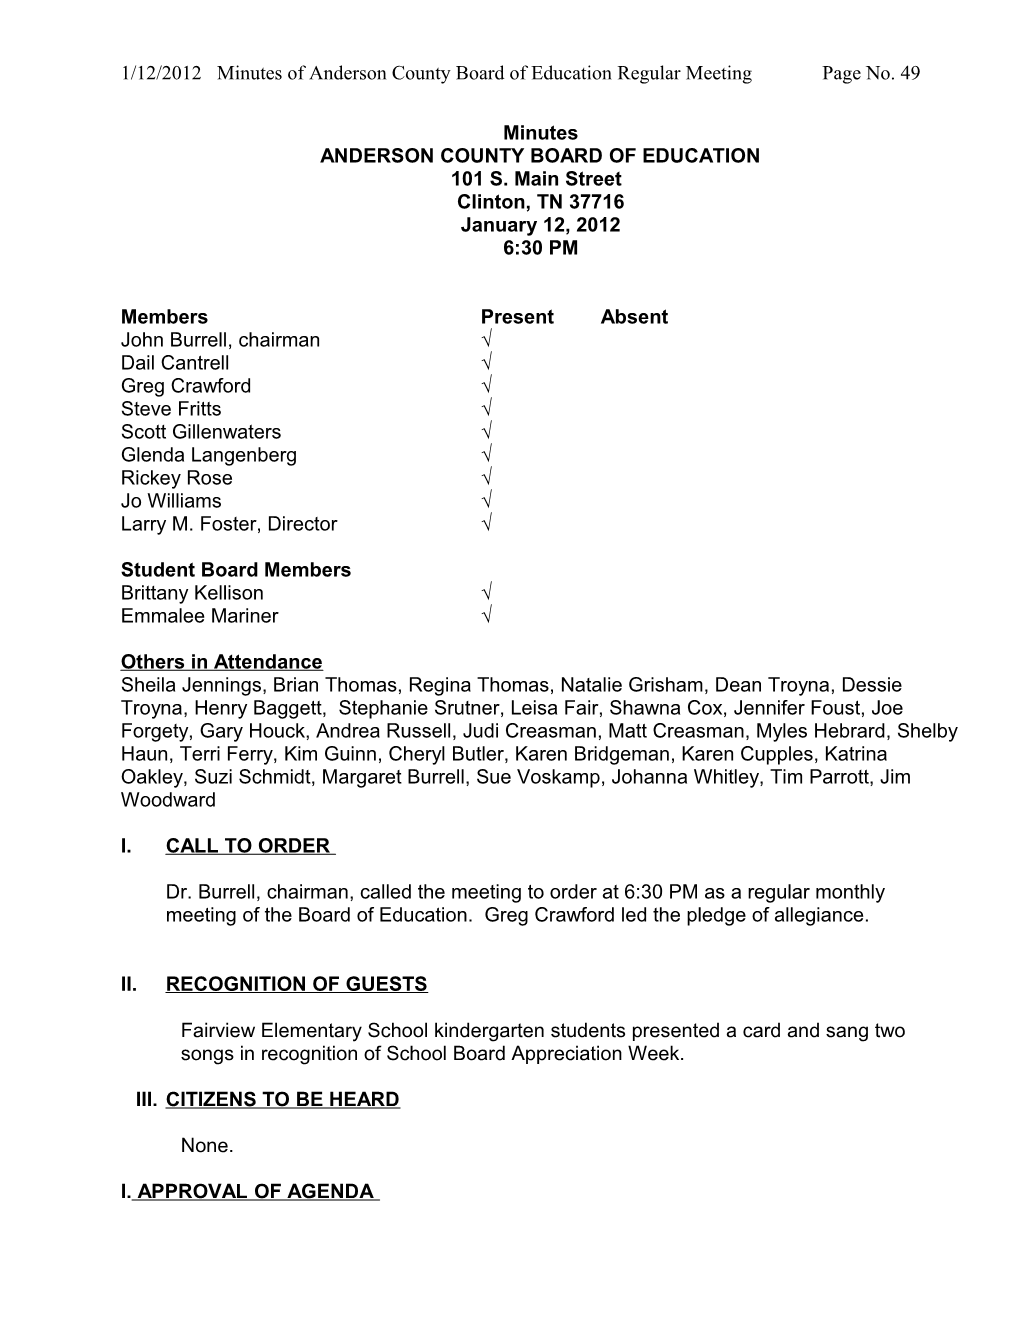 1/12/2012 Minutes of Anderson County Board of Education Regular Meeting Page No. 1